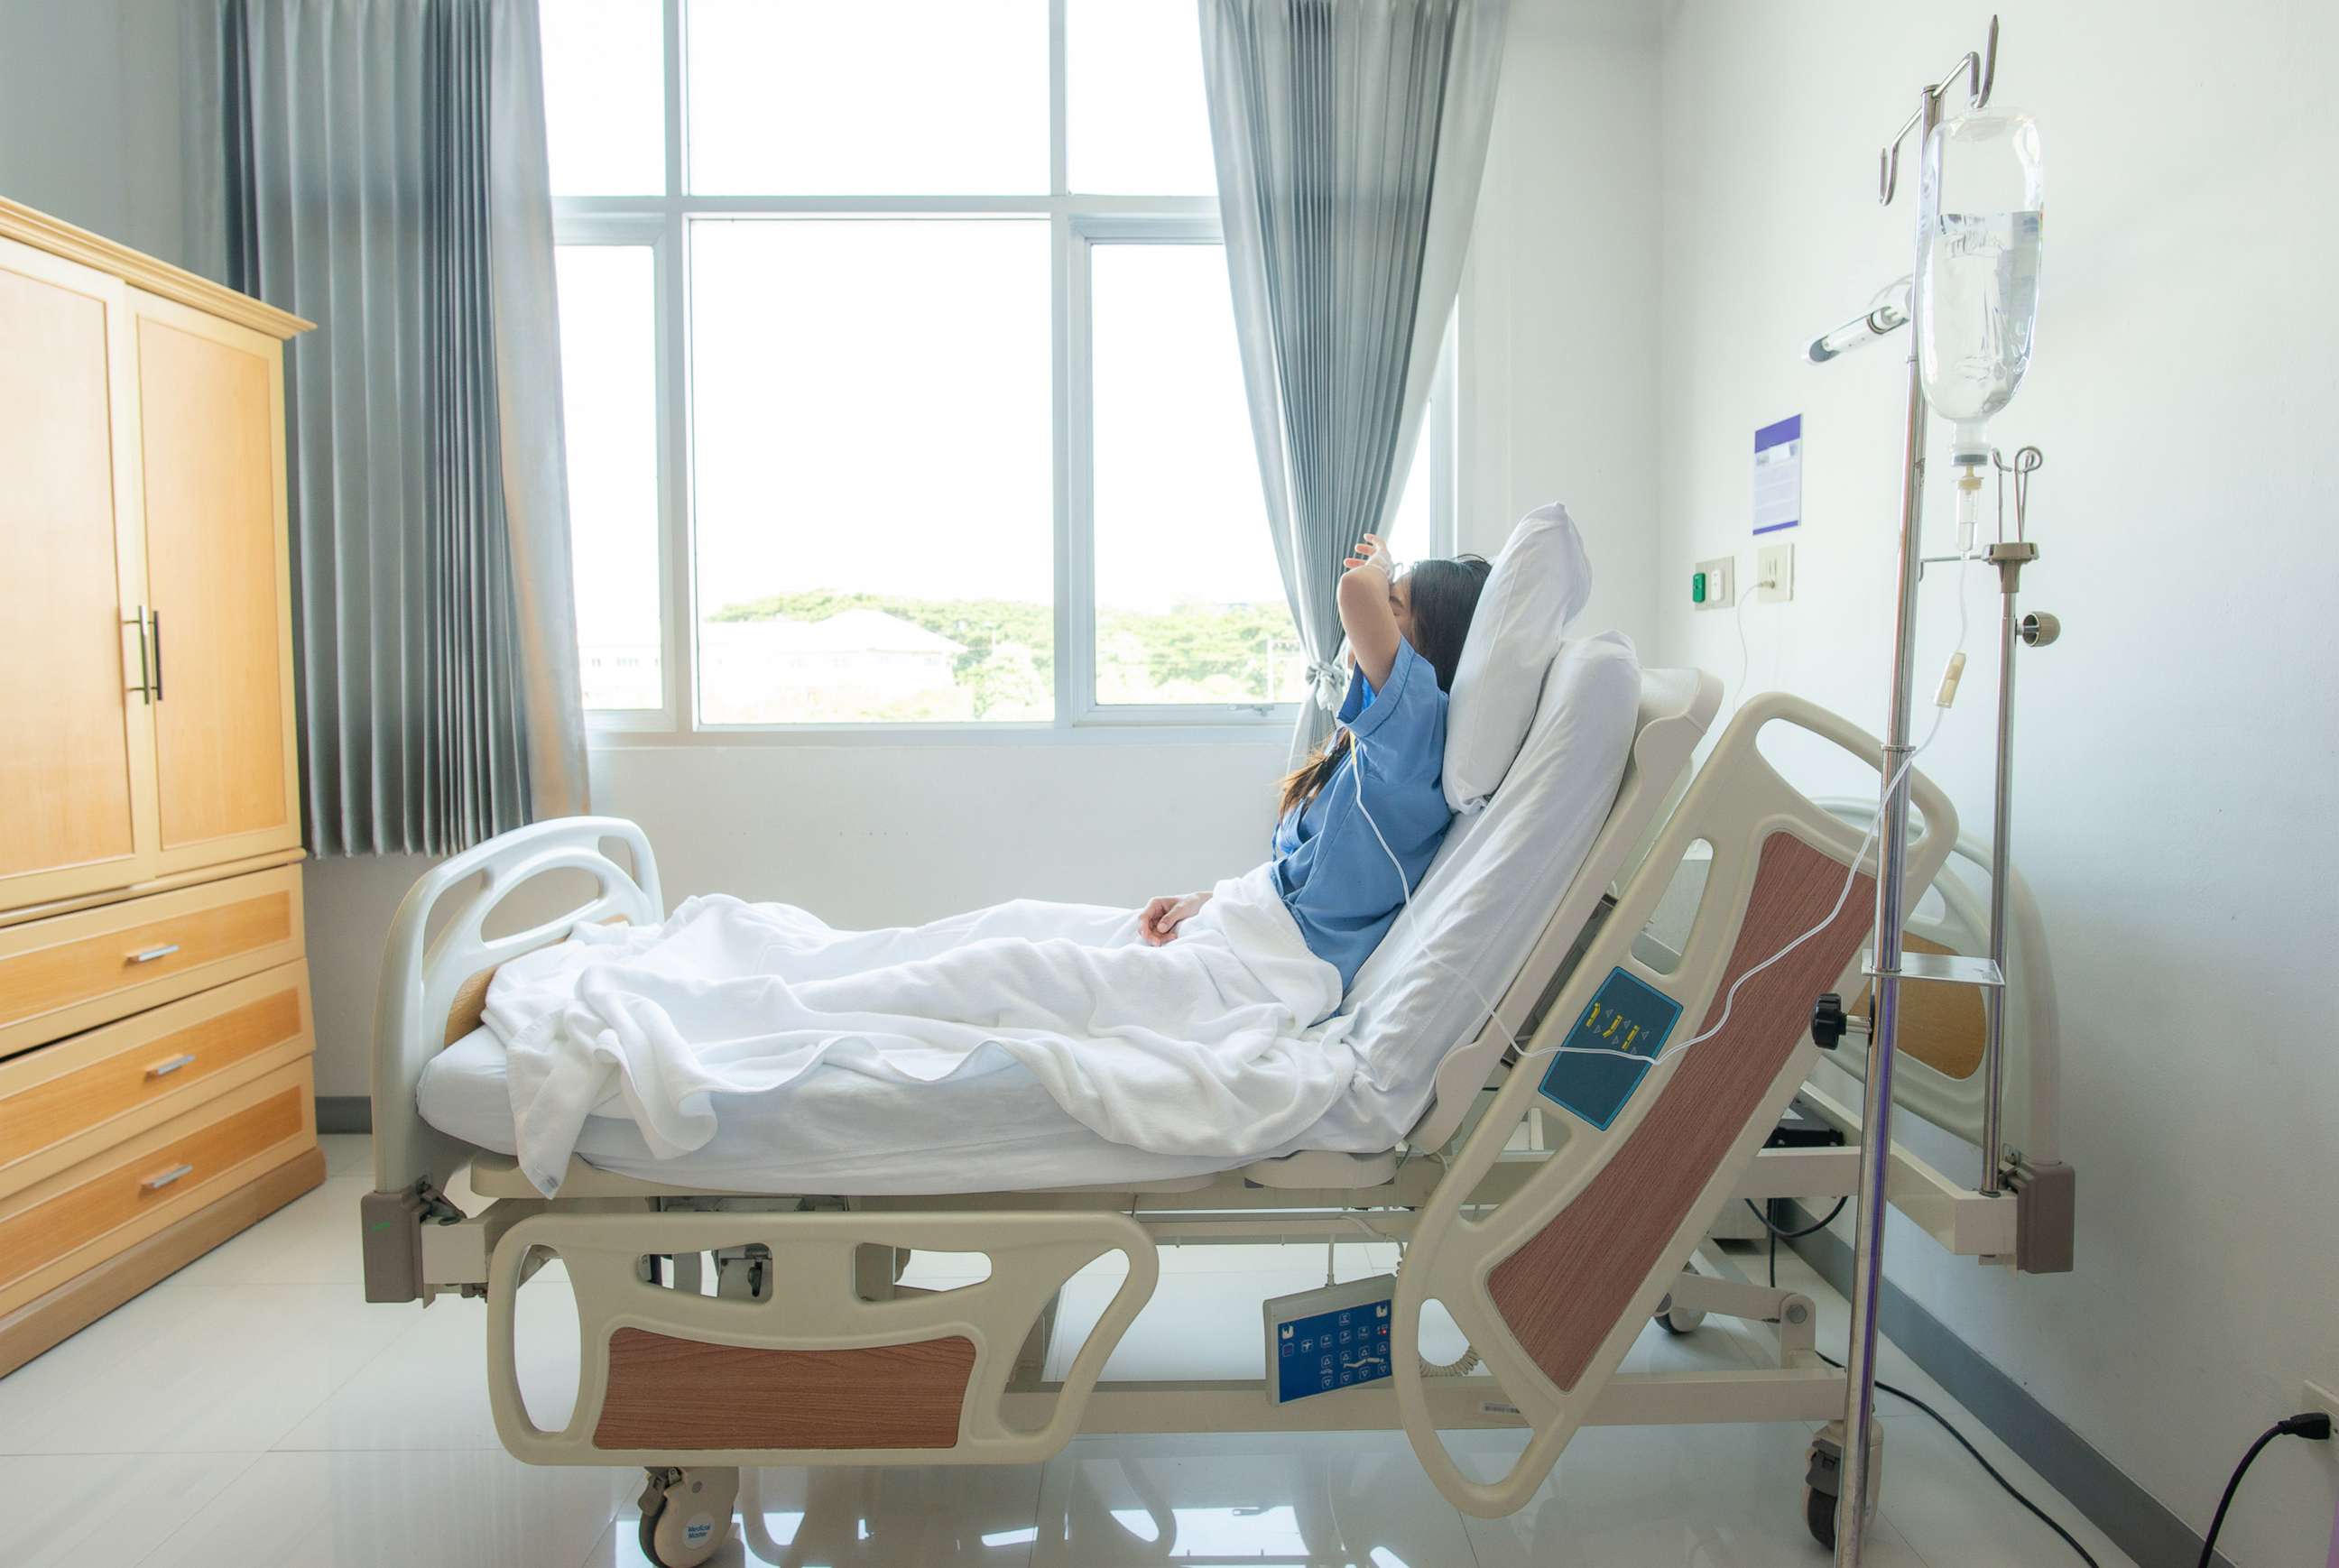 PHOTO: a patient in a hospital bed.